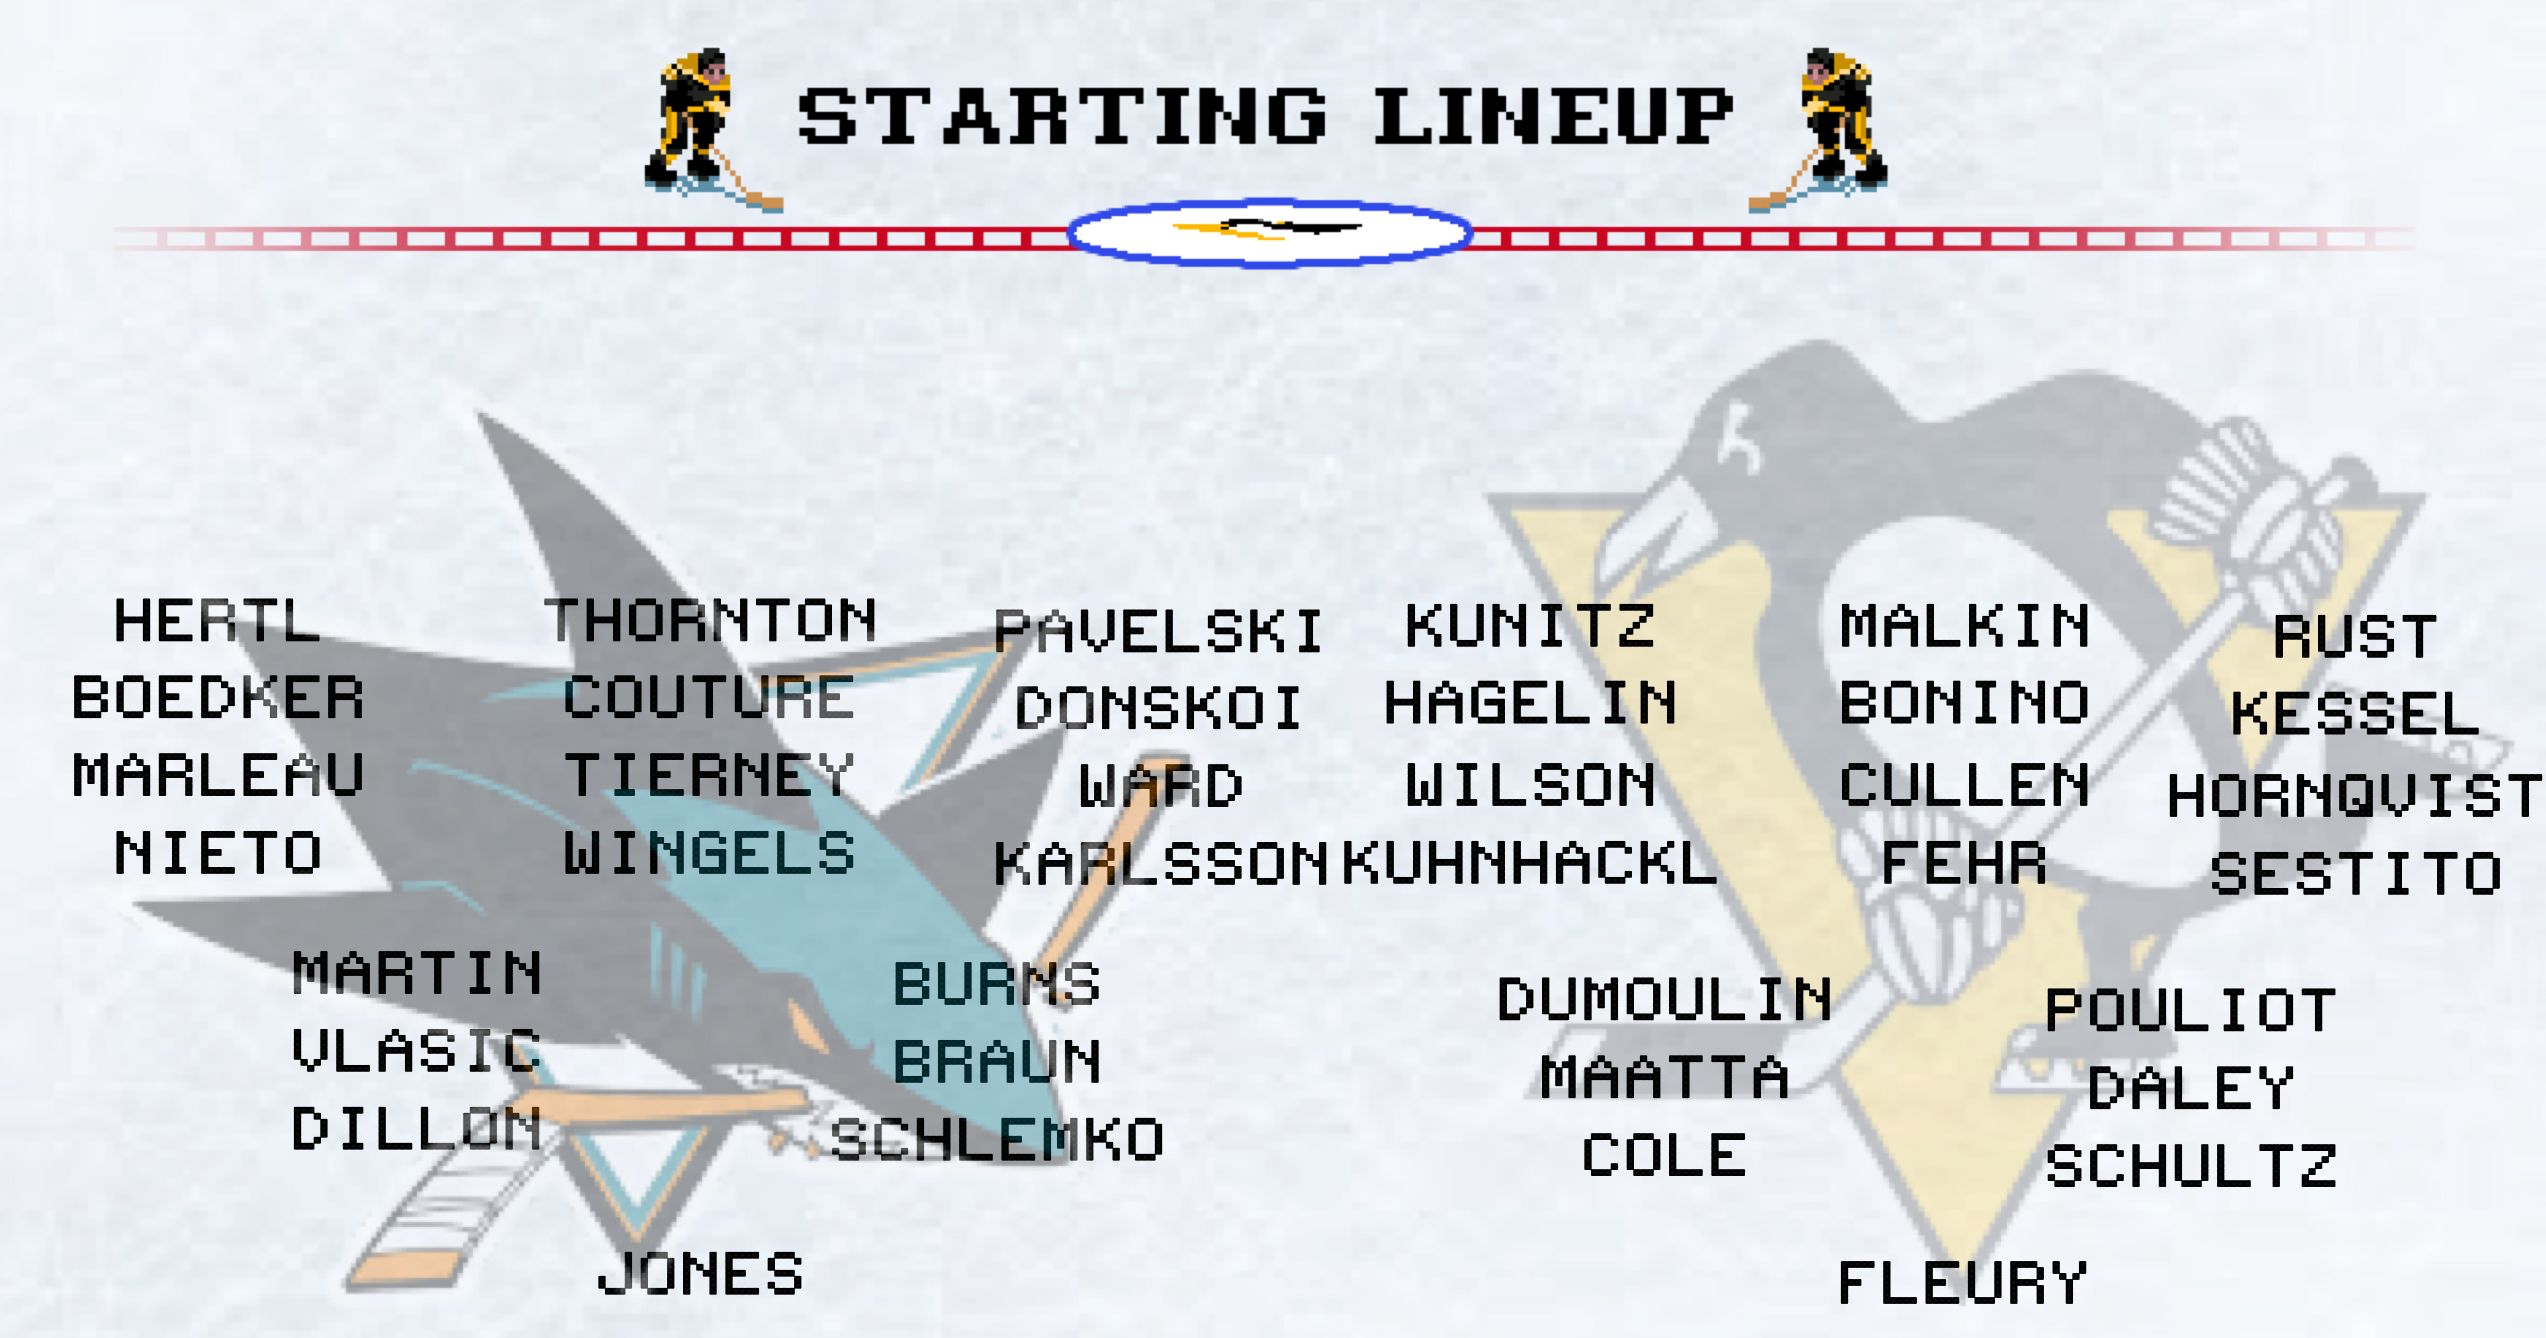 Letang and Sheary are both out tonight, assuming Pouliot will start, but his partner is unknown